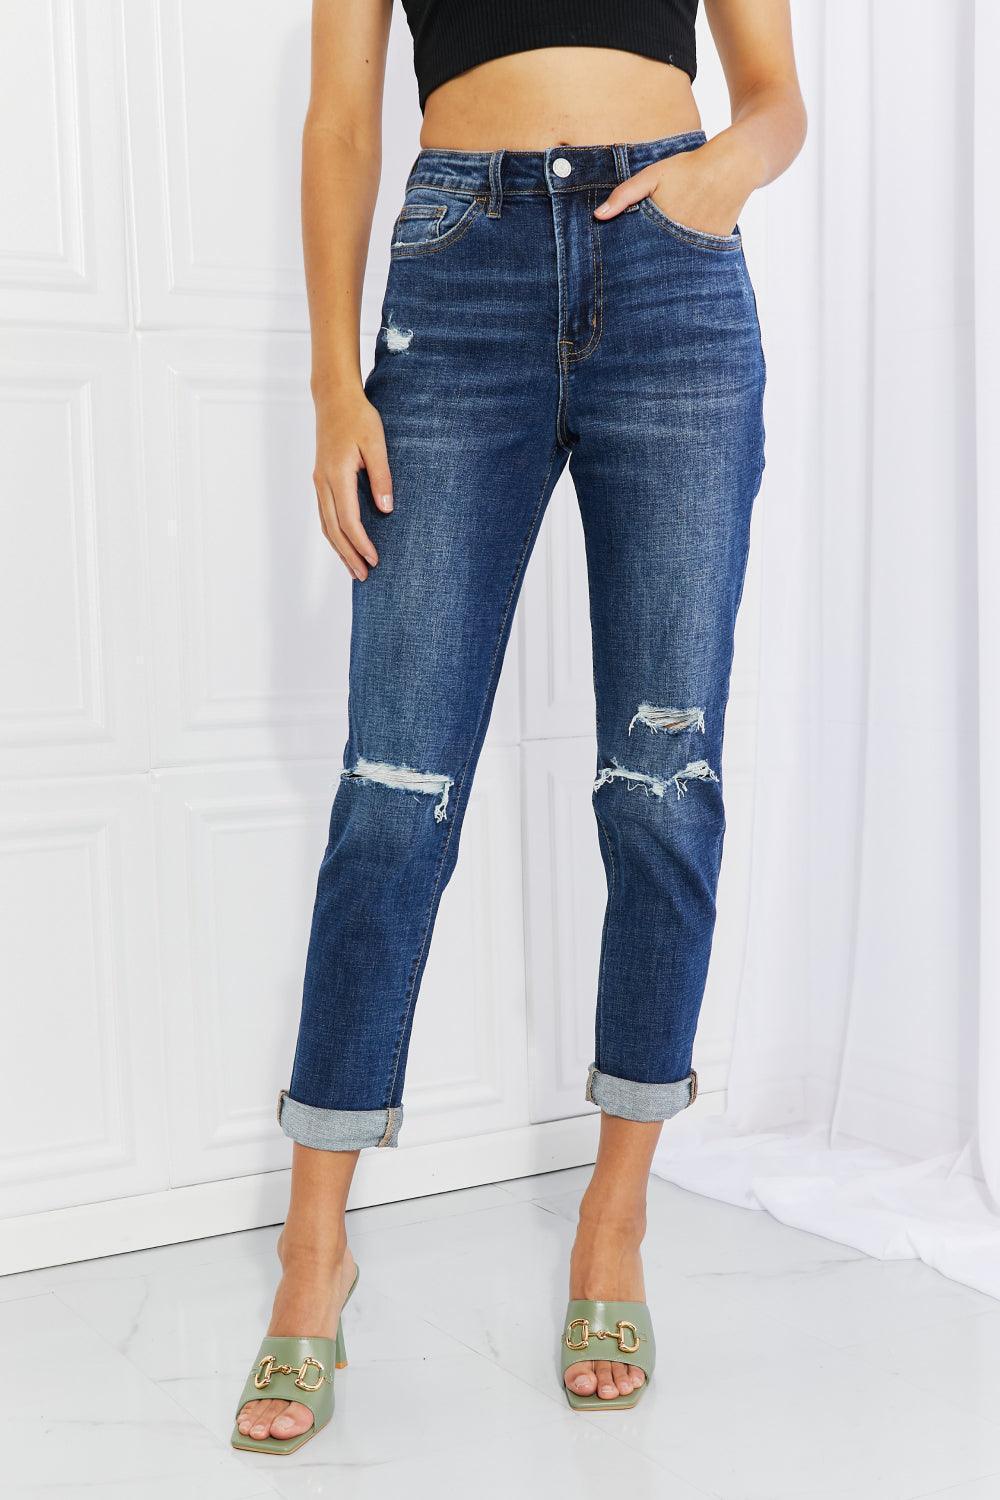 Plus Size Unflustered Distressed Cropped Jeans - MXSTUDIO.COM